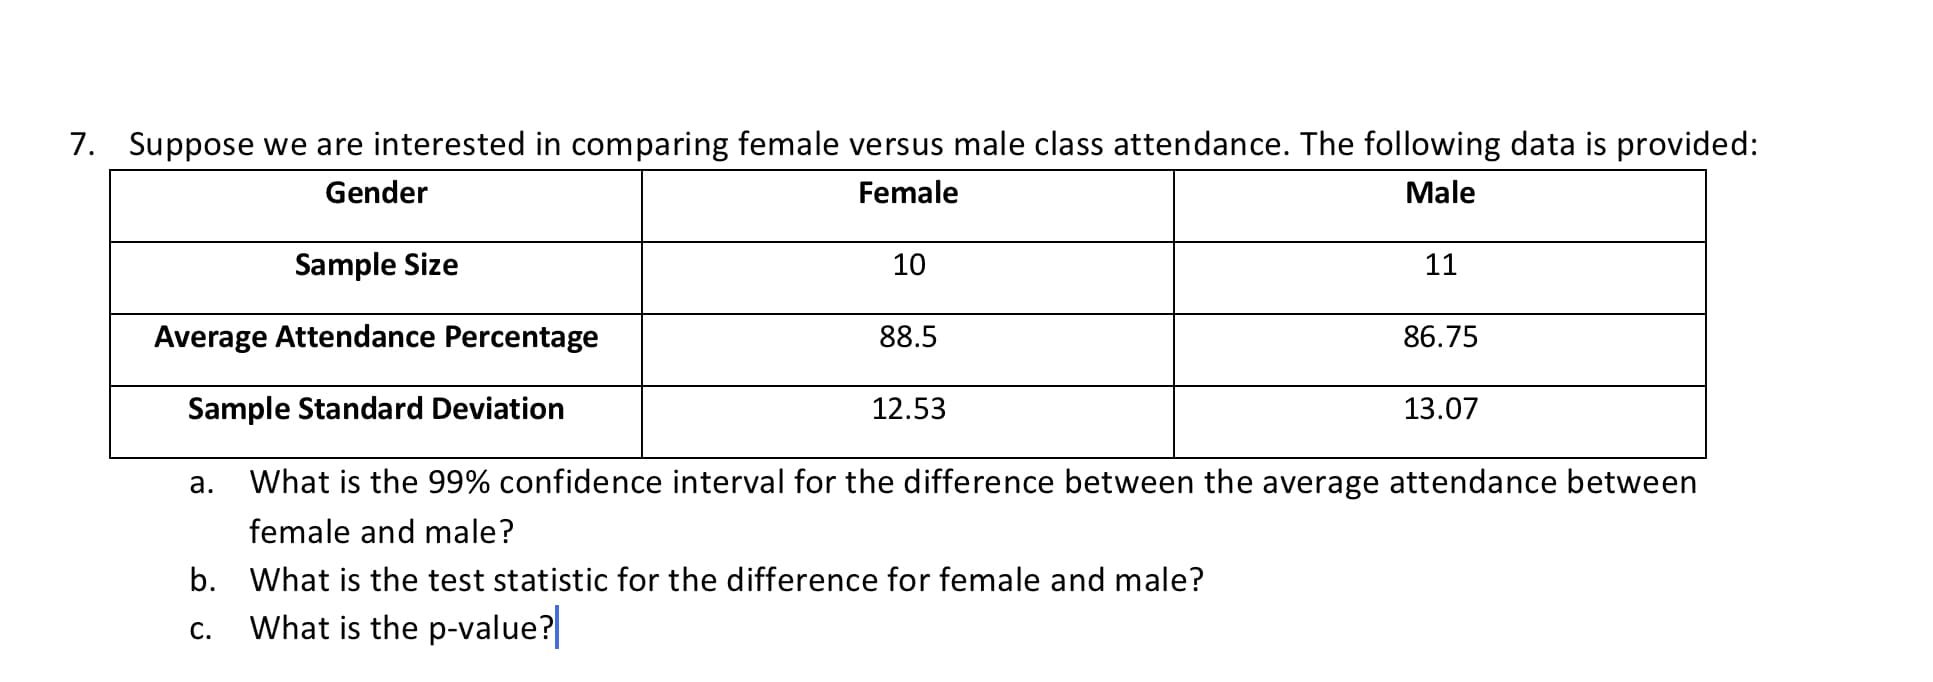 7. Suppose we are interested in comparing female versus male class attendance. The following data is provided:
Gender
Female
Male
Sample Size
10
11
Average Attendance Percentage
88.5
86.75
Sample Standard Deviation
12.53
13.07
a. What is the 99% confidence interval for the difference between the average attendance between
female and male?
b.
Vhat is
test statistic for the difference for female and male?
What is the p-value?
С.
